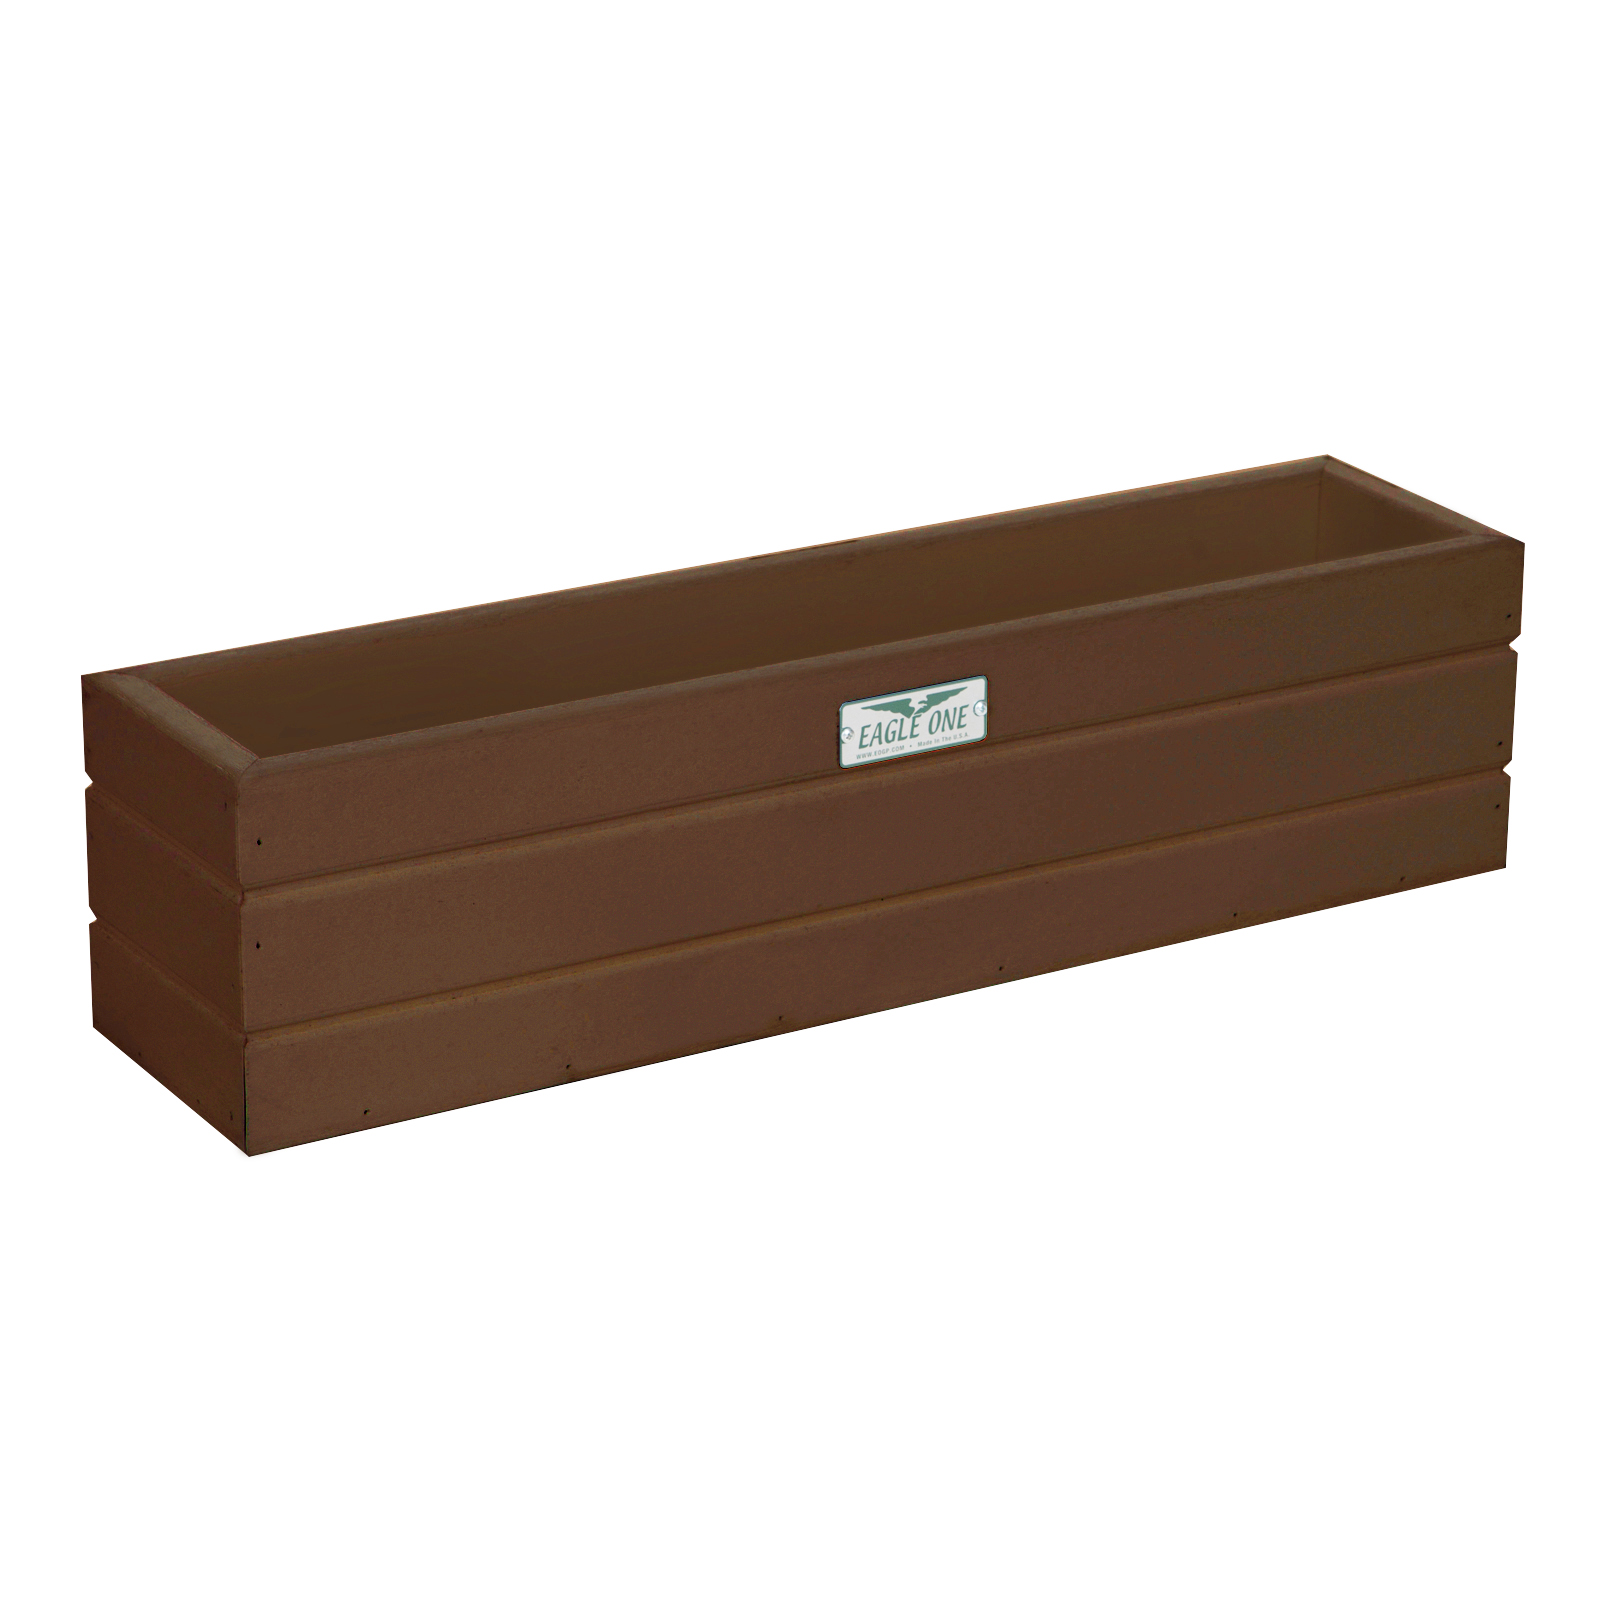 Large Herb Commercial Grade Planter Window Box, Brown